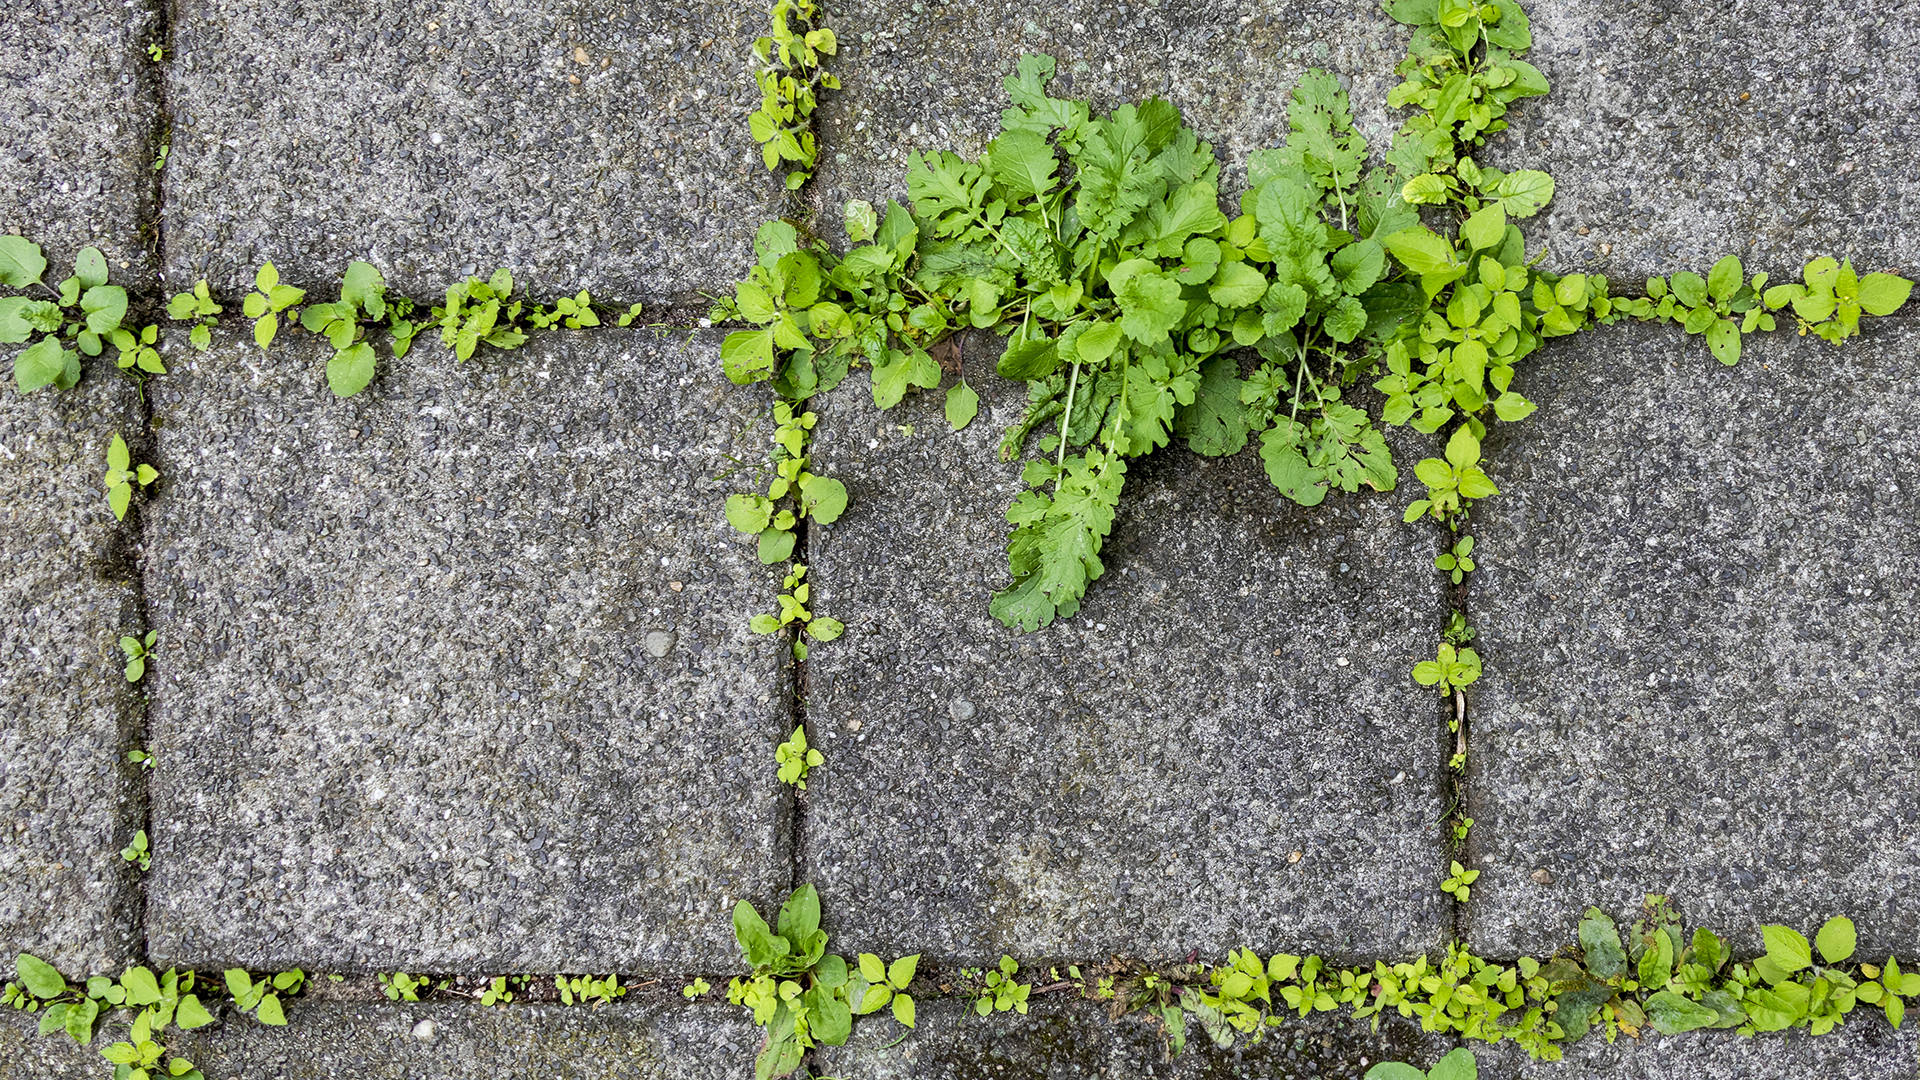 I’m a gardening pro – don’t use salt to kill weeds in your paving slabs